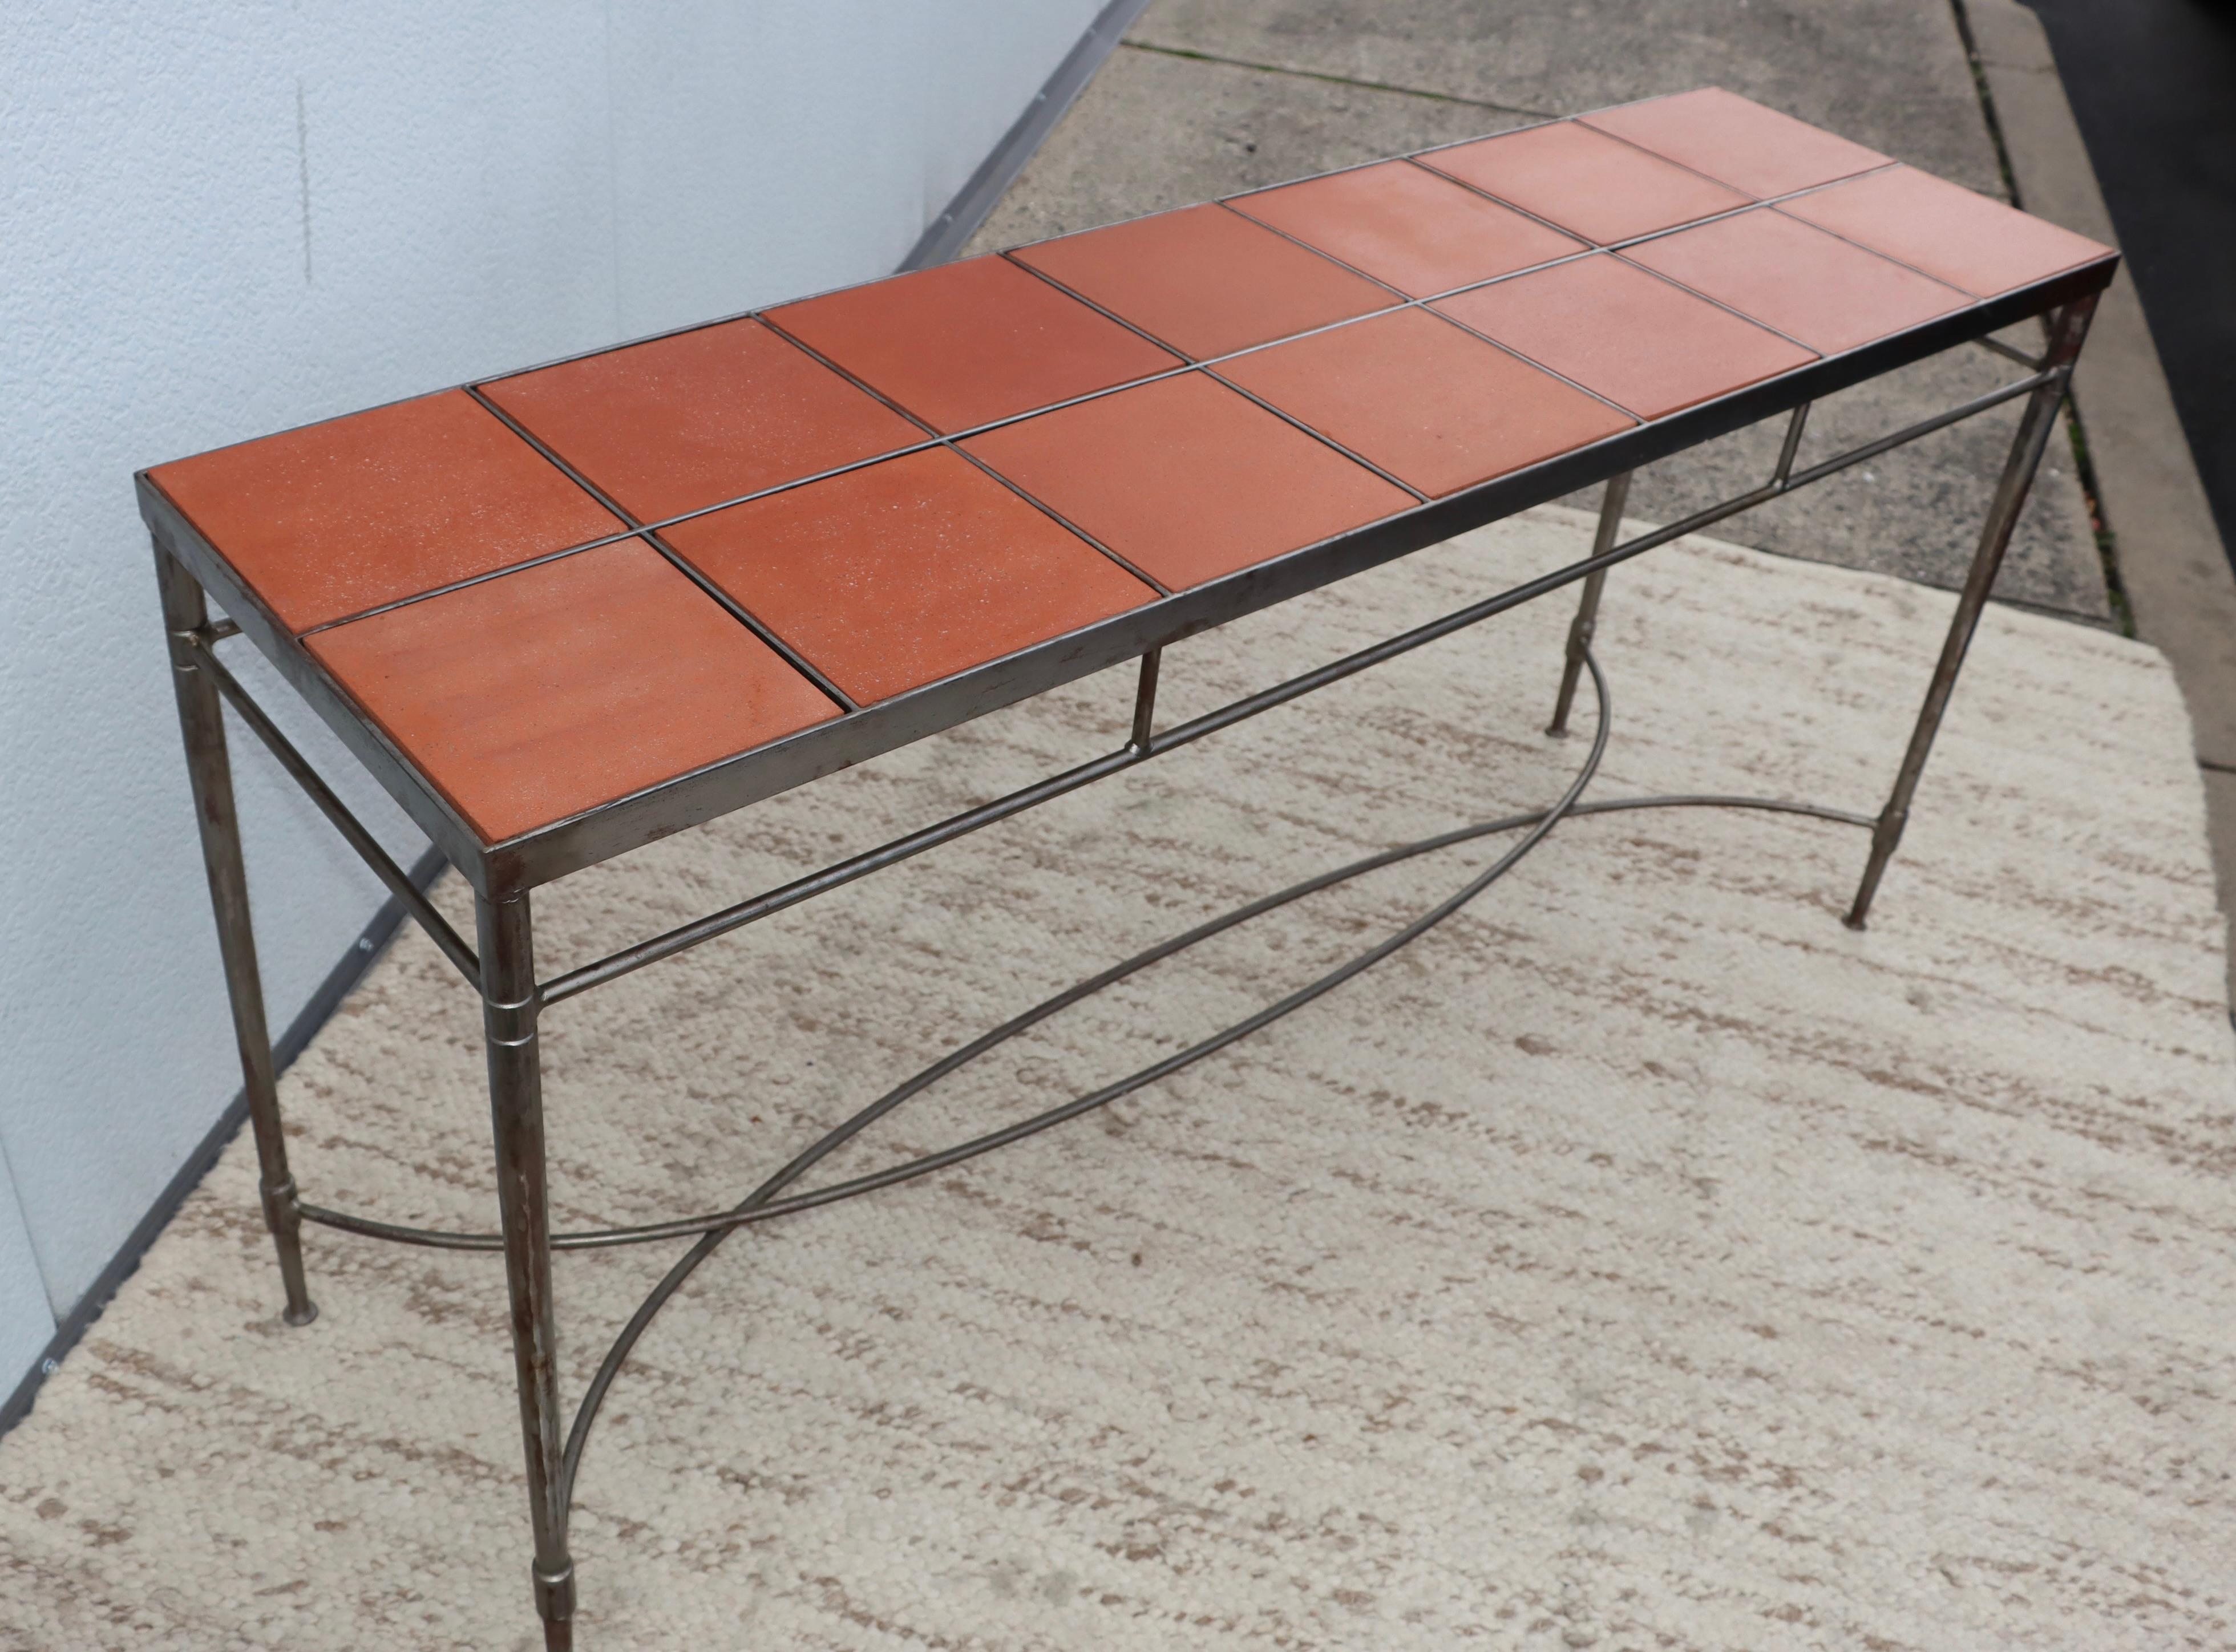 1970's Italian Iron Console Table with Impruneta Terracotta Tile Inserts For Sale 6